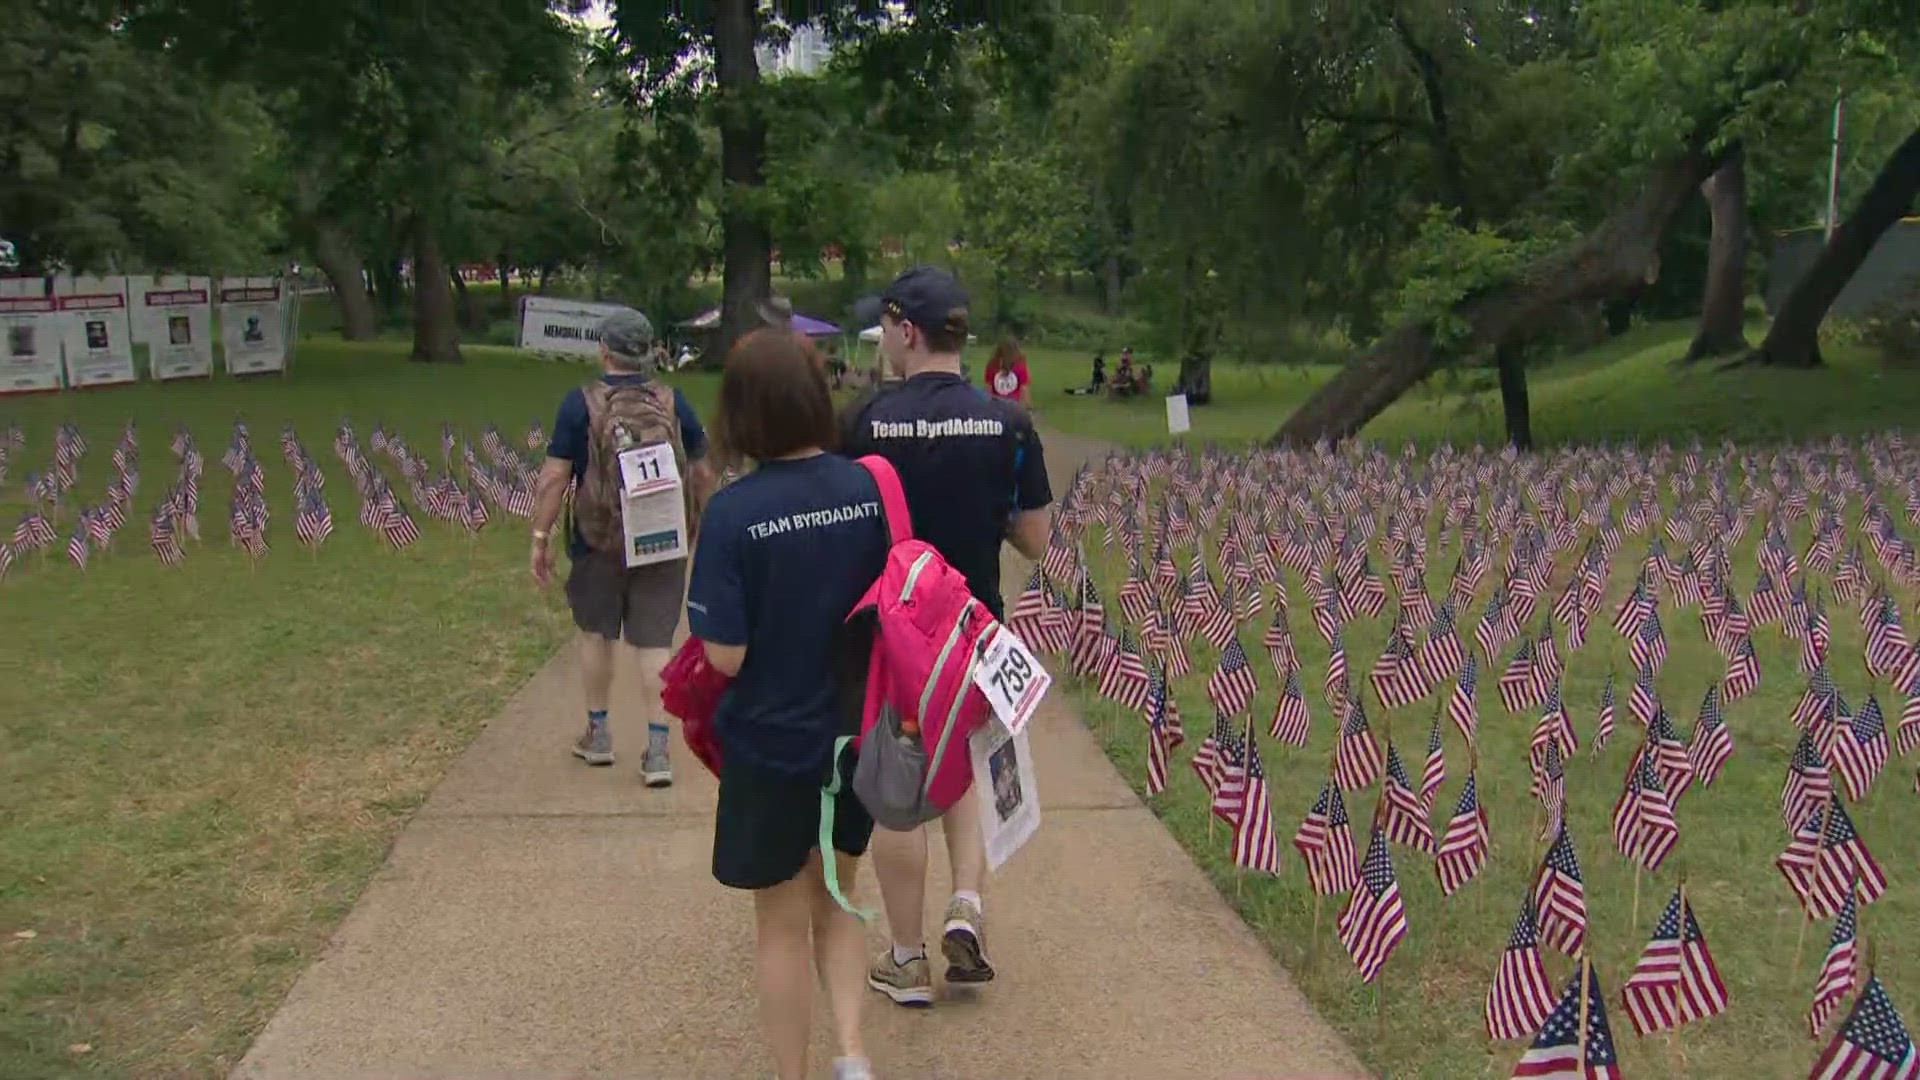 People from all over the country come to Dallas to honor those lives on Memorial Day weekend.